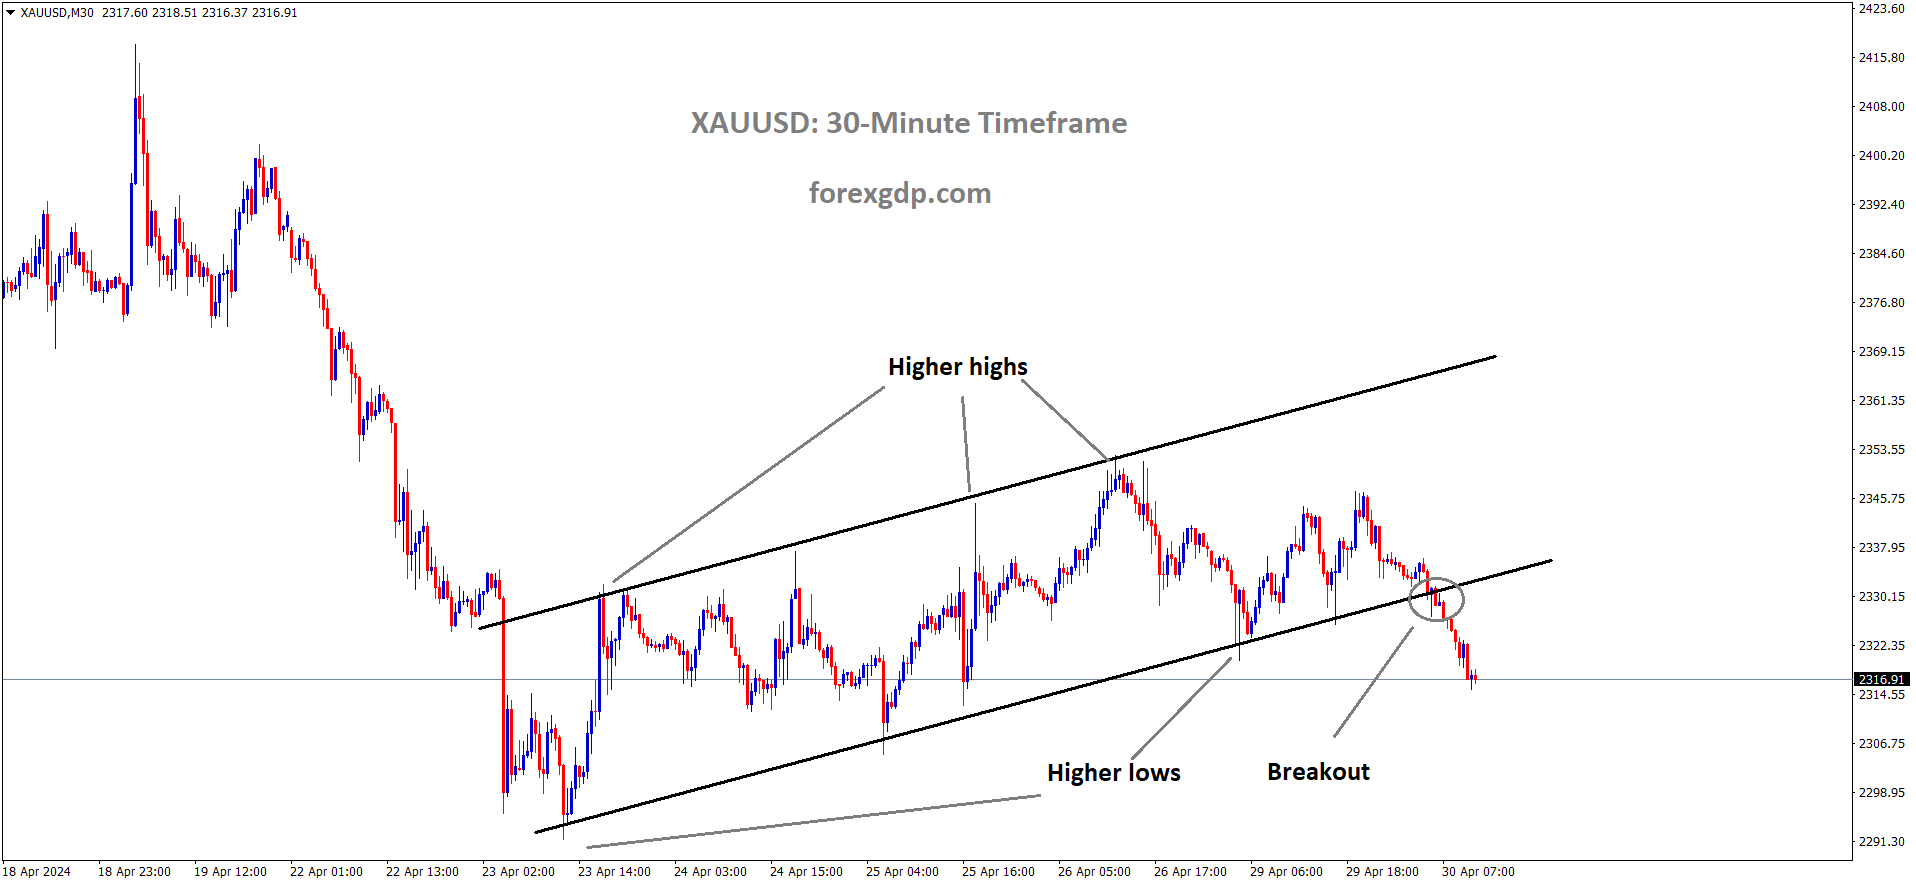 XAUUSD Gold price has broken the Ascending channel in downside